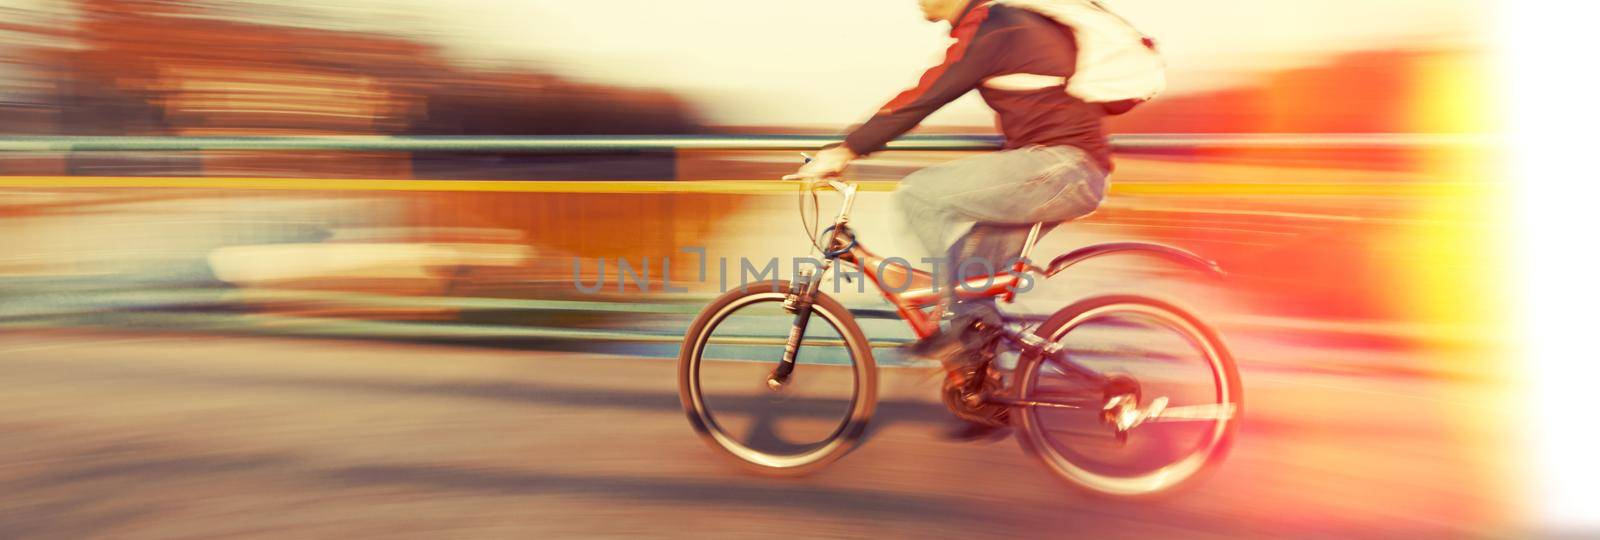 Abstract blurred image of cyclist on the city roadway. Intentional motion blur. Vintage filter with intentional color shift